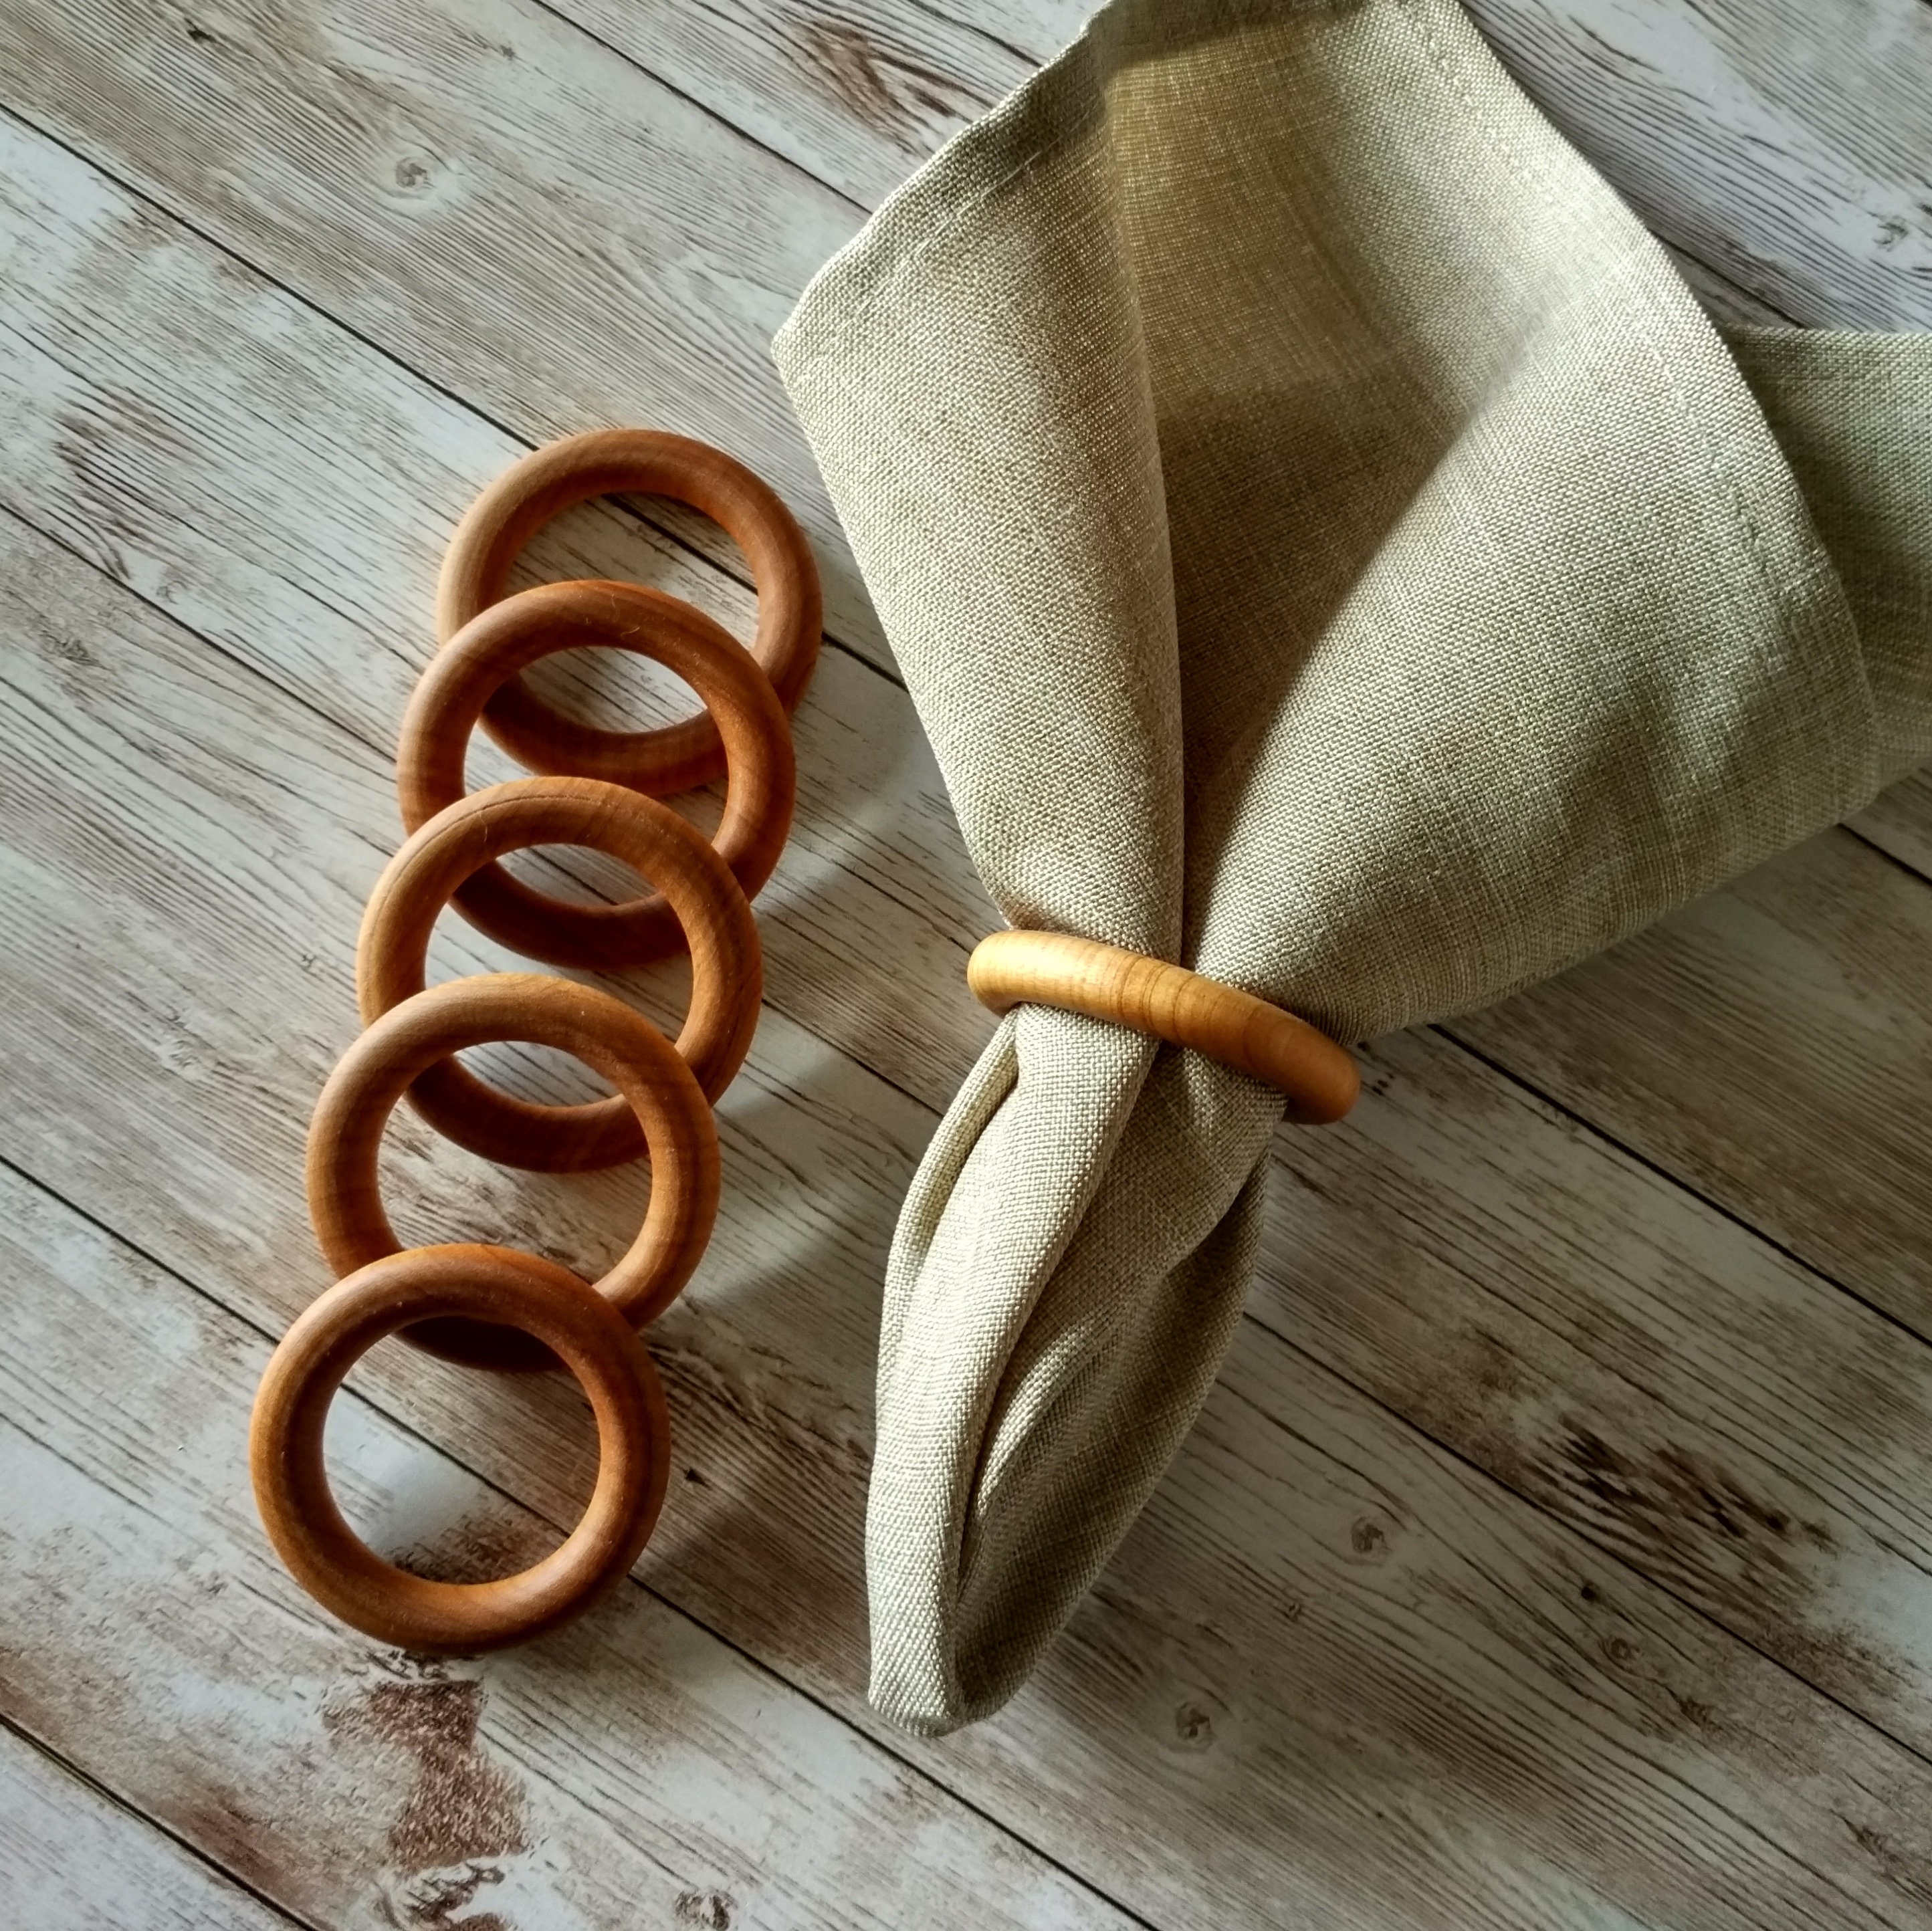 Handcrafted Wooden Rustic Style Napkin Rings: A Cozy Touch for - Etsy